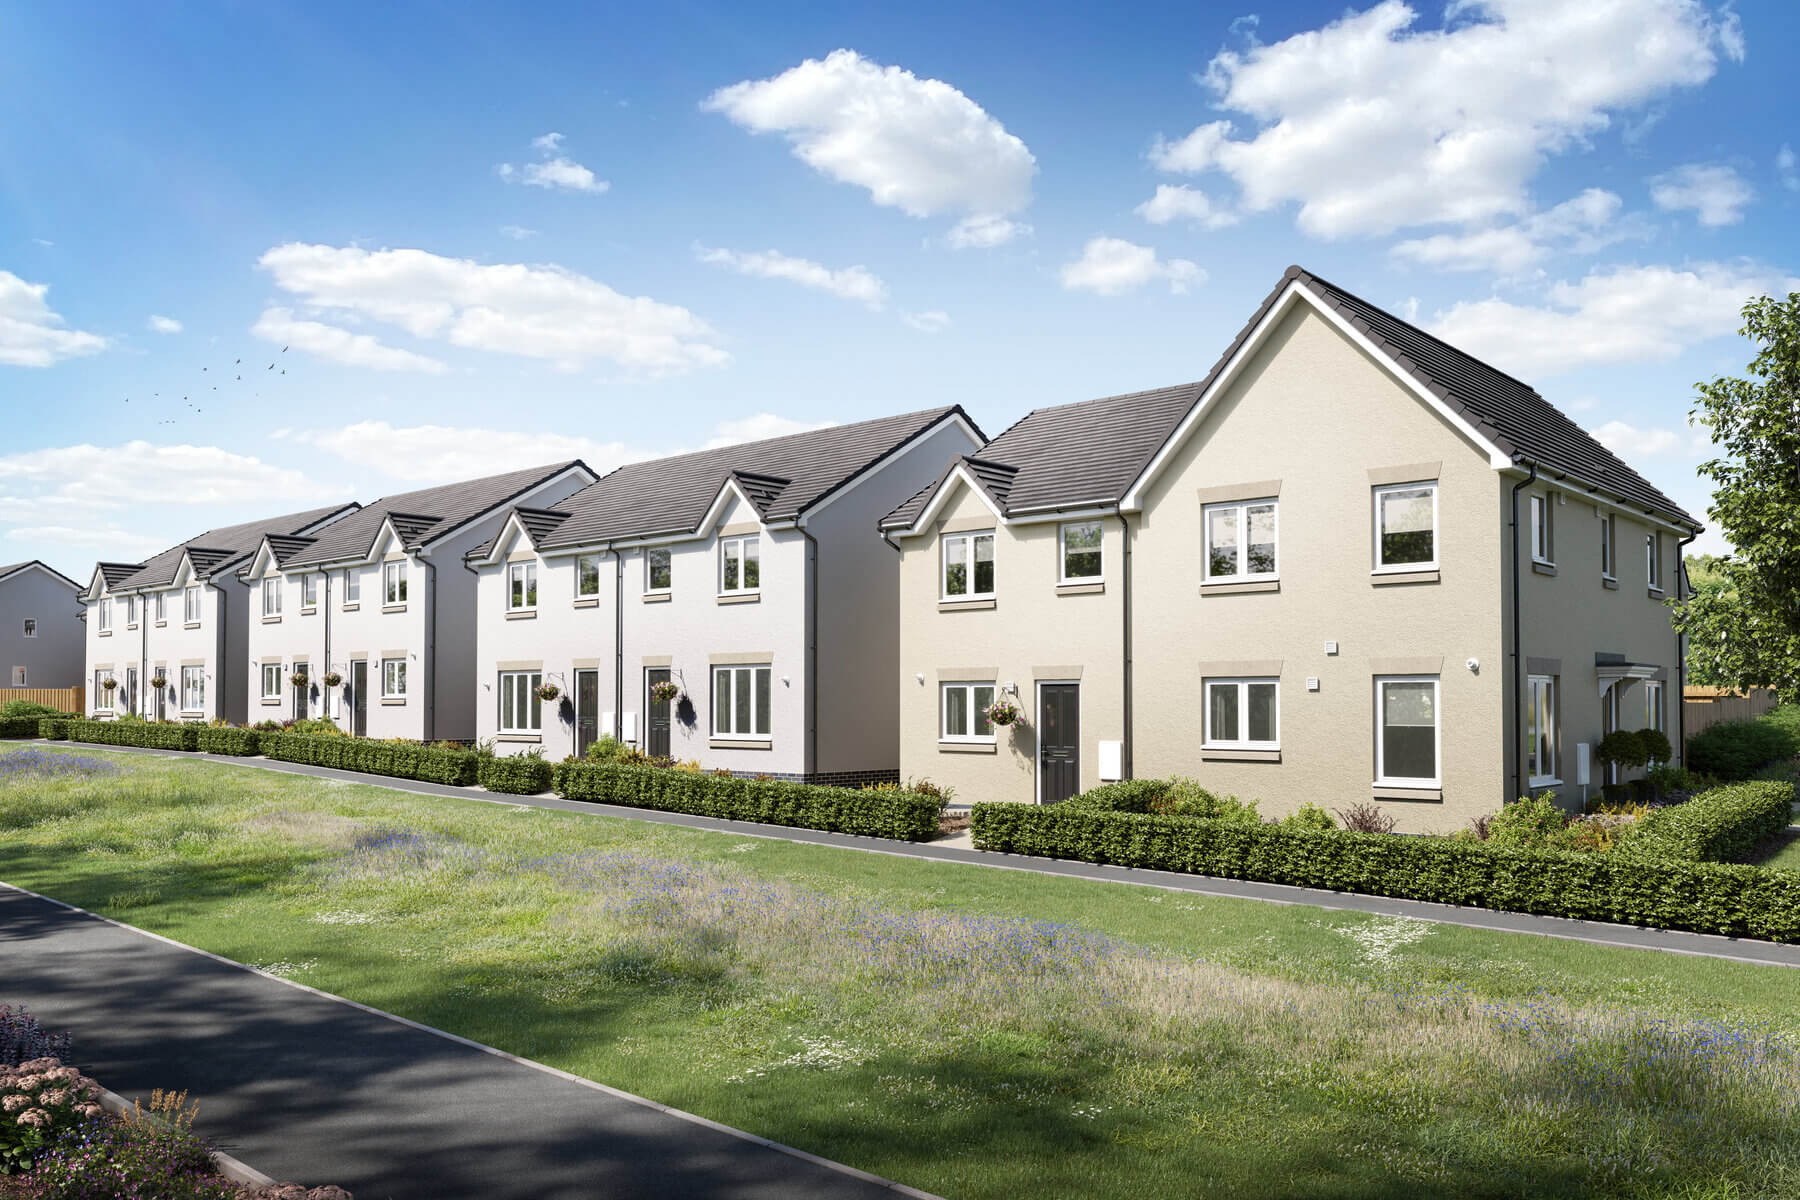 Taylor Wimpey secures planning consent for more new homes in Winchburgh